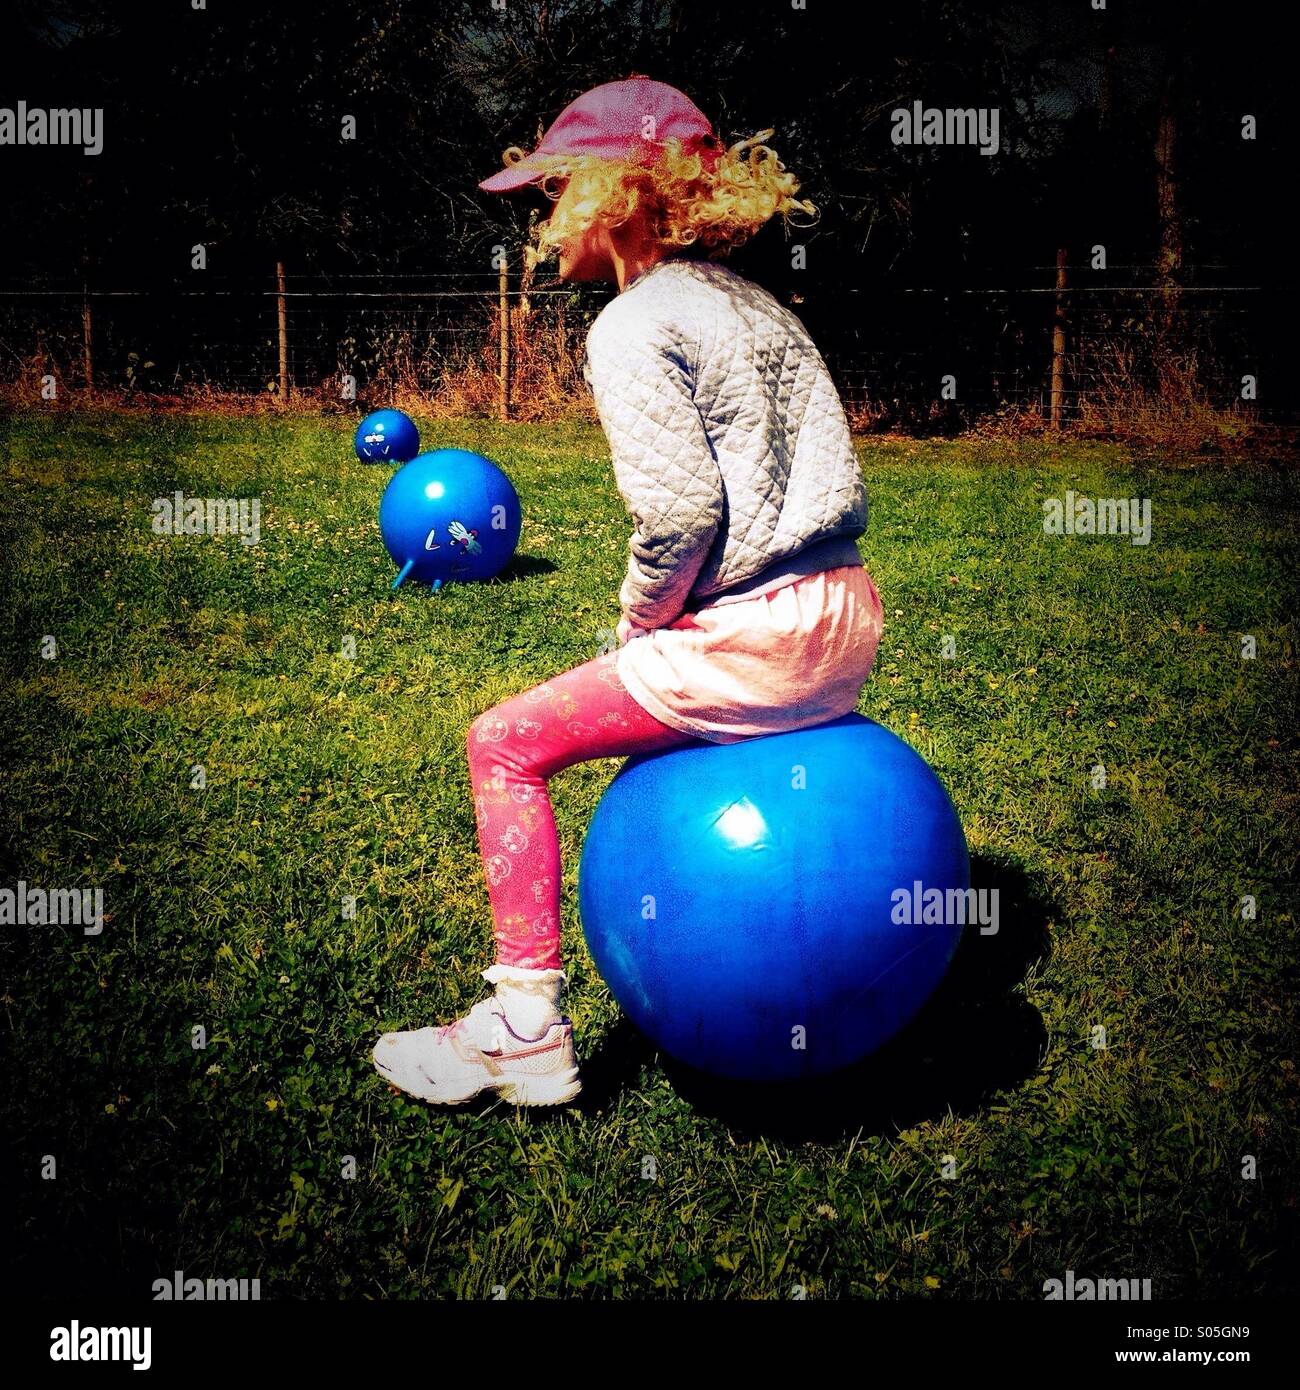 Young girl bouncing on space hopper Stock Photo